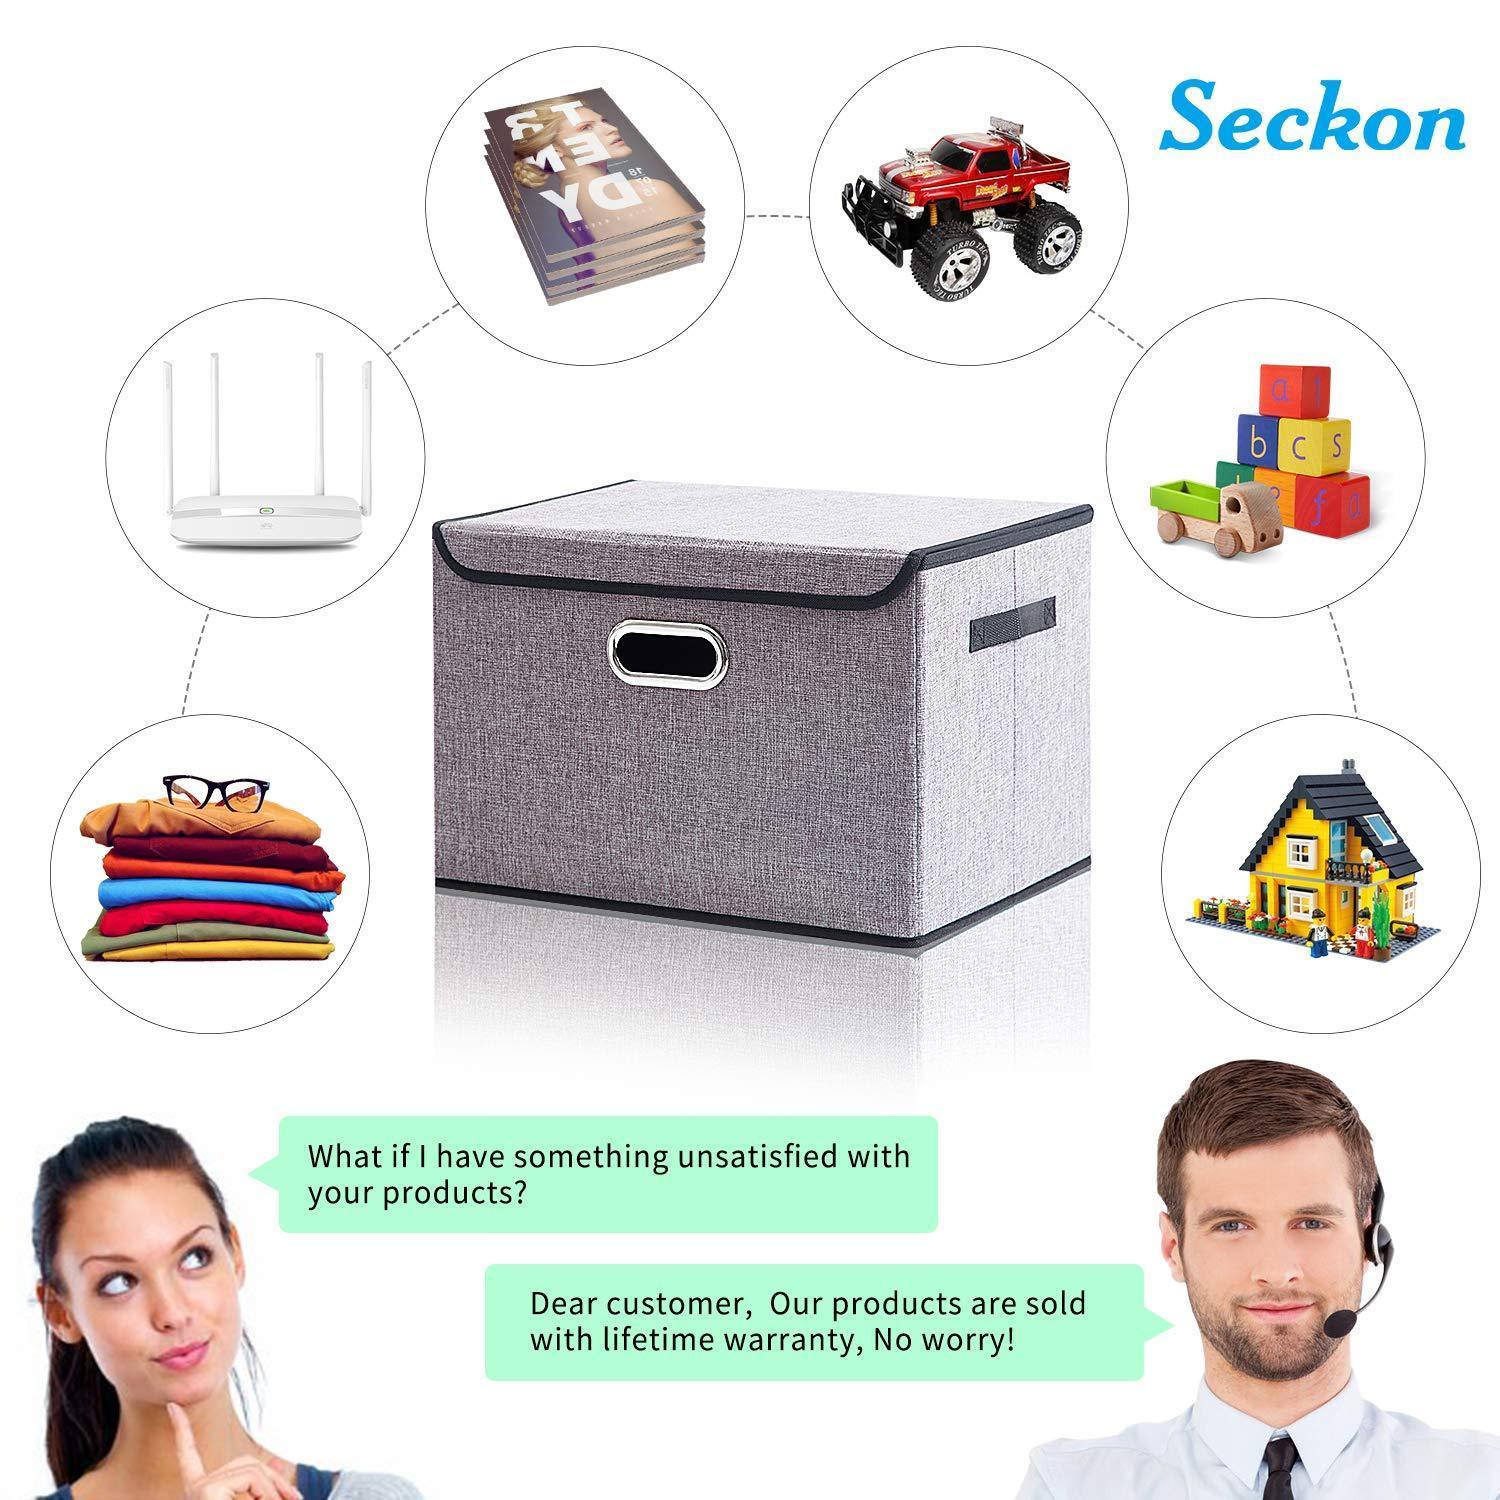 Buy now seckon collapsible storage box container bins with lids covers2pack large odorless linen fabric storage organizers cube with metal handles for office bedroom closet toys